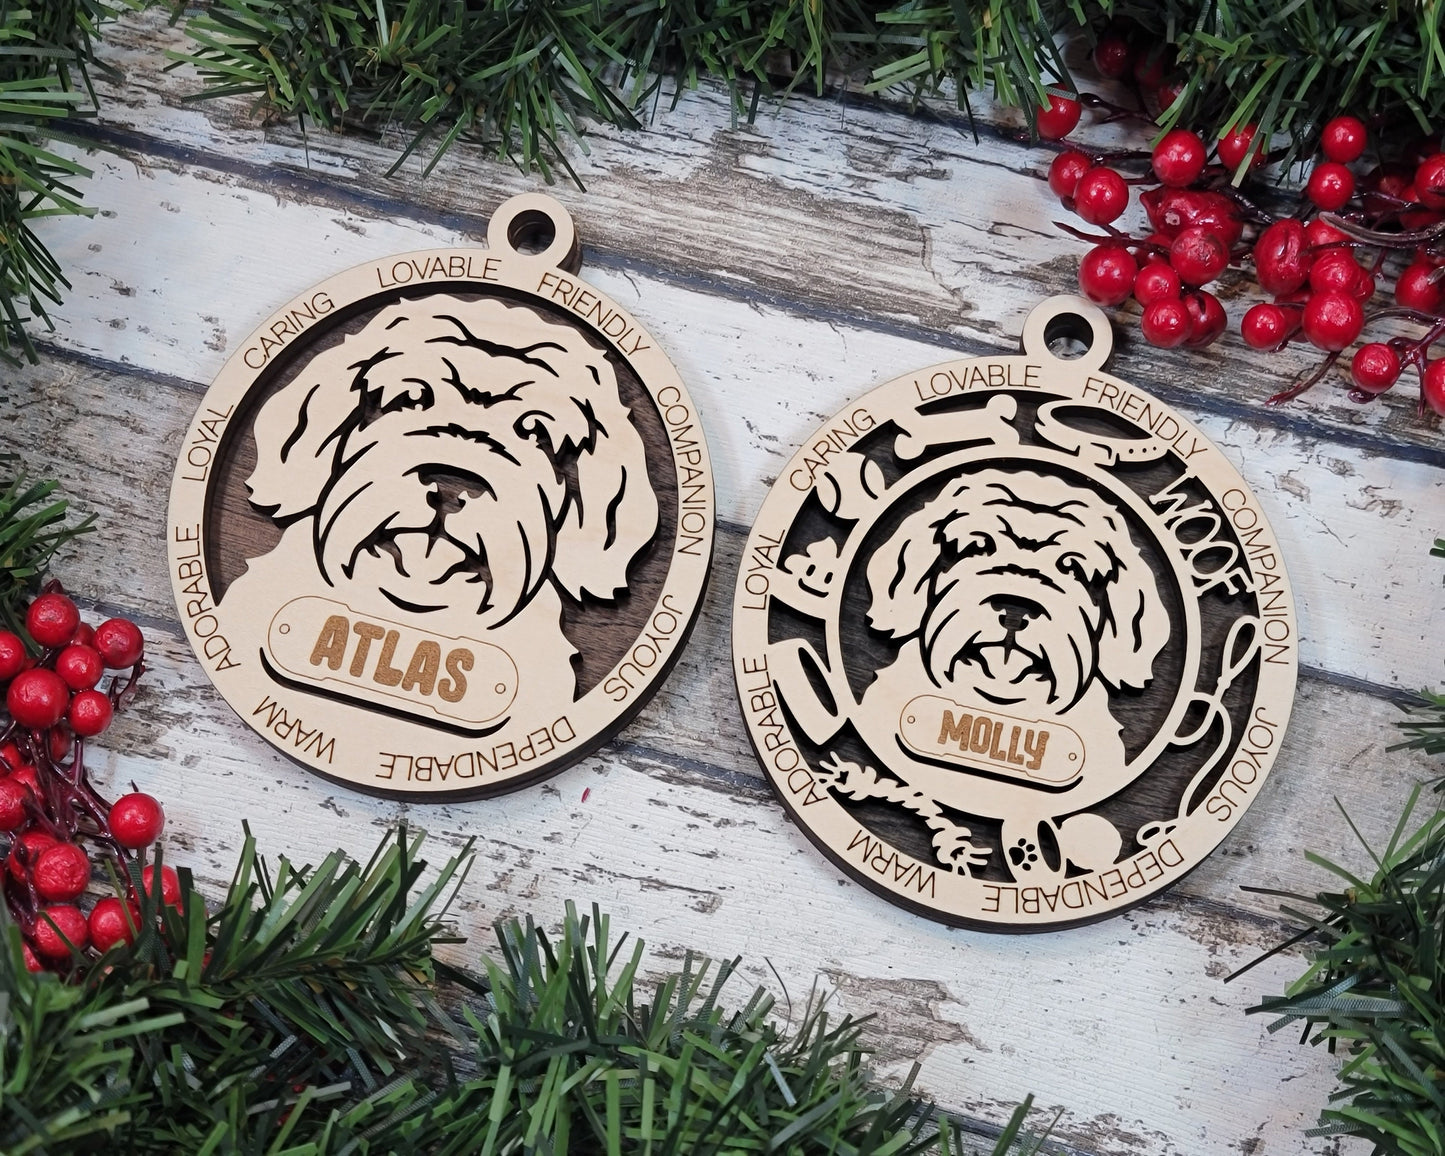 Australian Doodle - Adorable Dog Ornaments - 2 Ornaments included - SVG, PDF, AI File Download - Sized for Glowforge